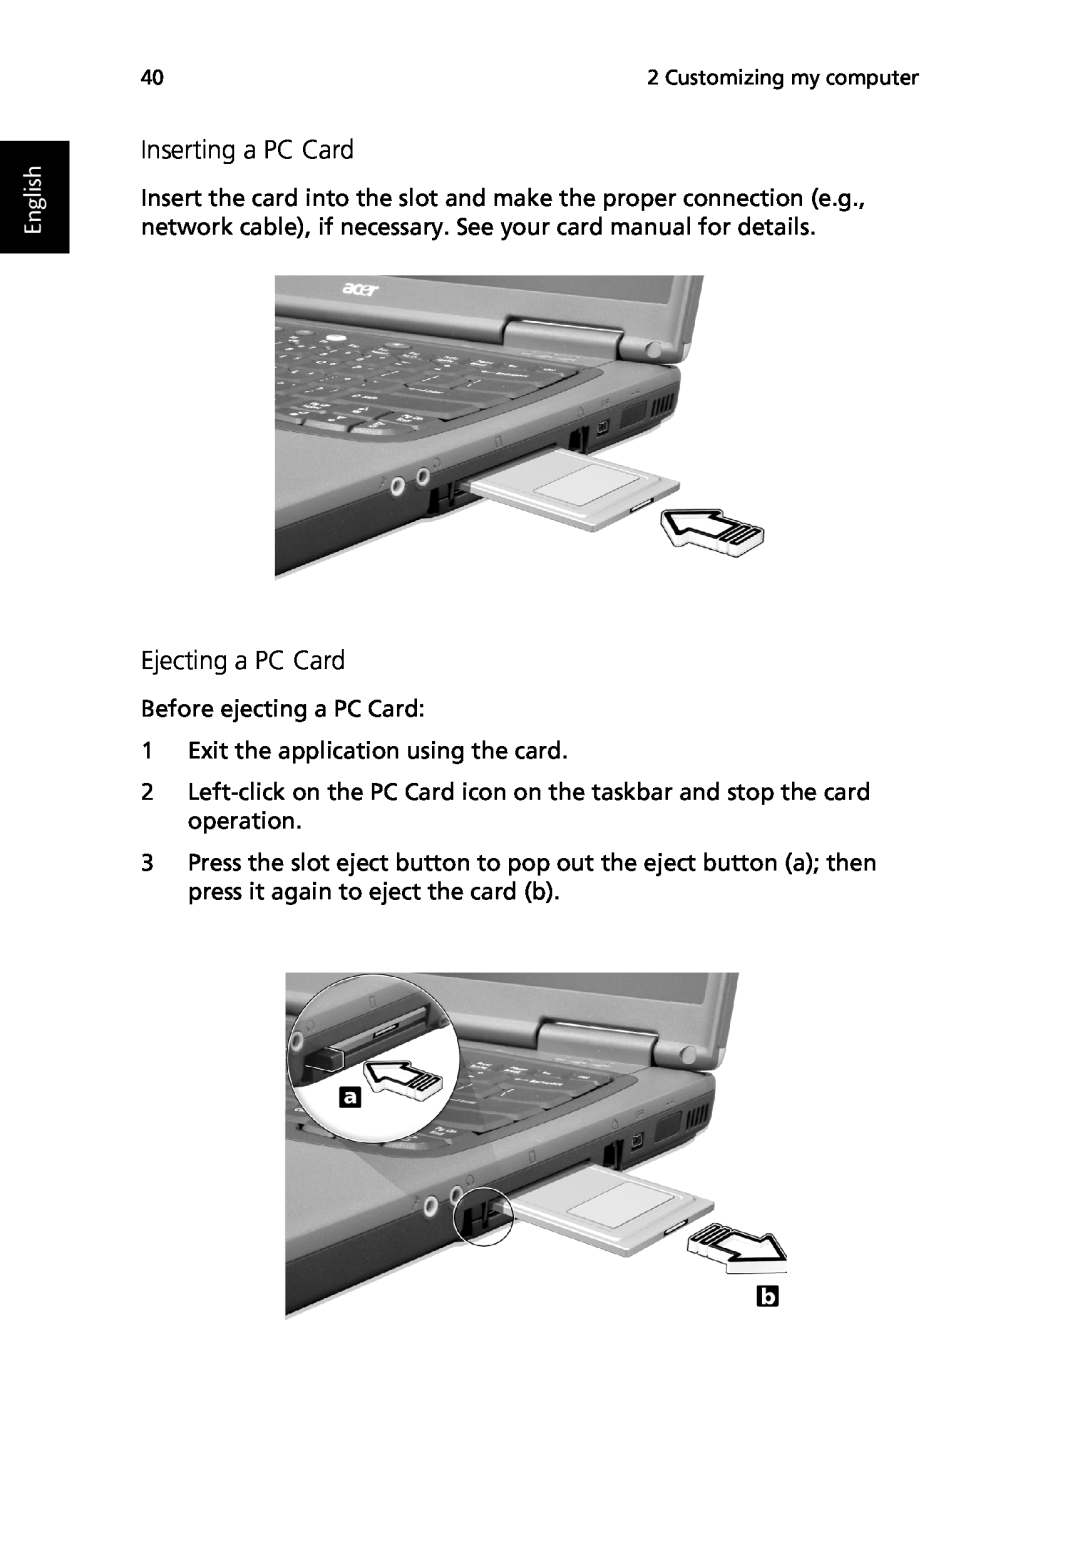 Acer TravelMate 530 manual Inserting a PC Card, Ejecting a PC Card, English 